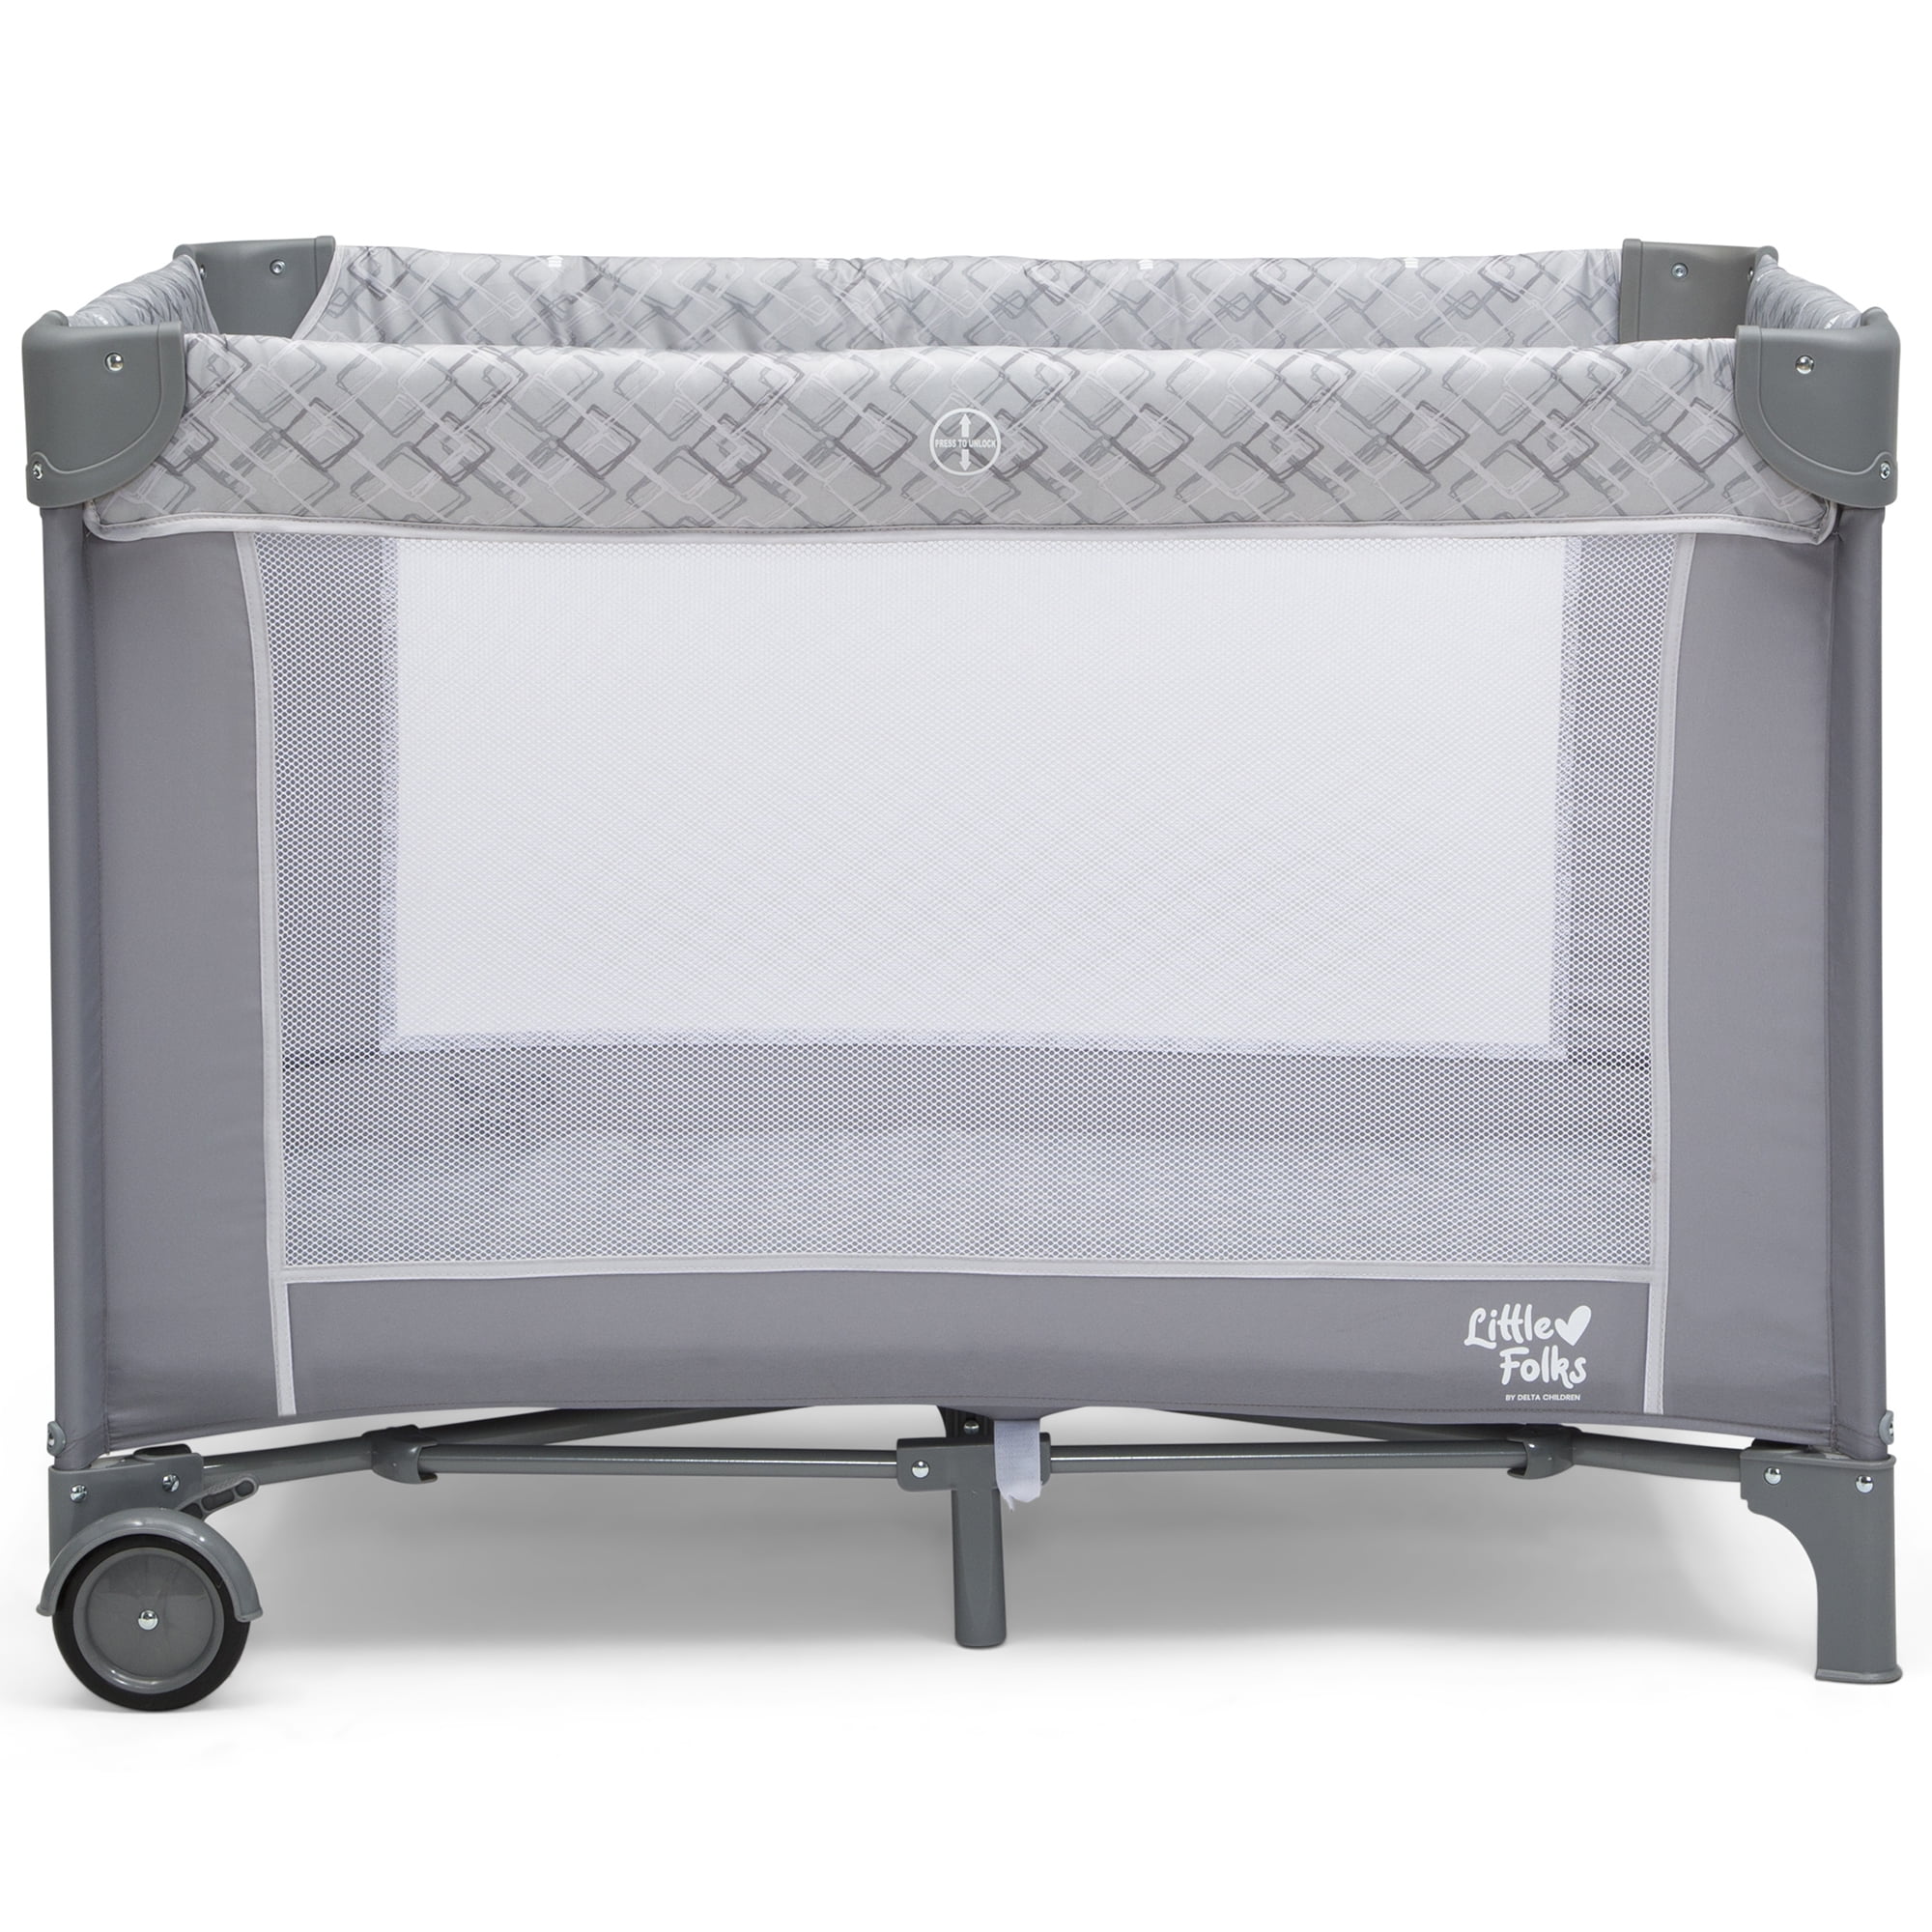 Little Folks by Delta Children LX Play Yard with Removable Bassinet and Changing Table by Delta Children, Square Unisex - Walmart.com